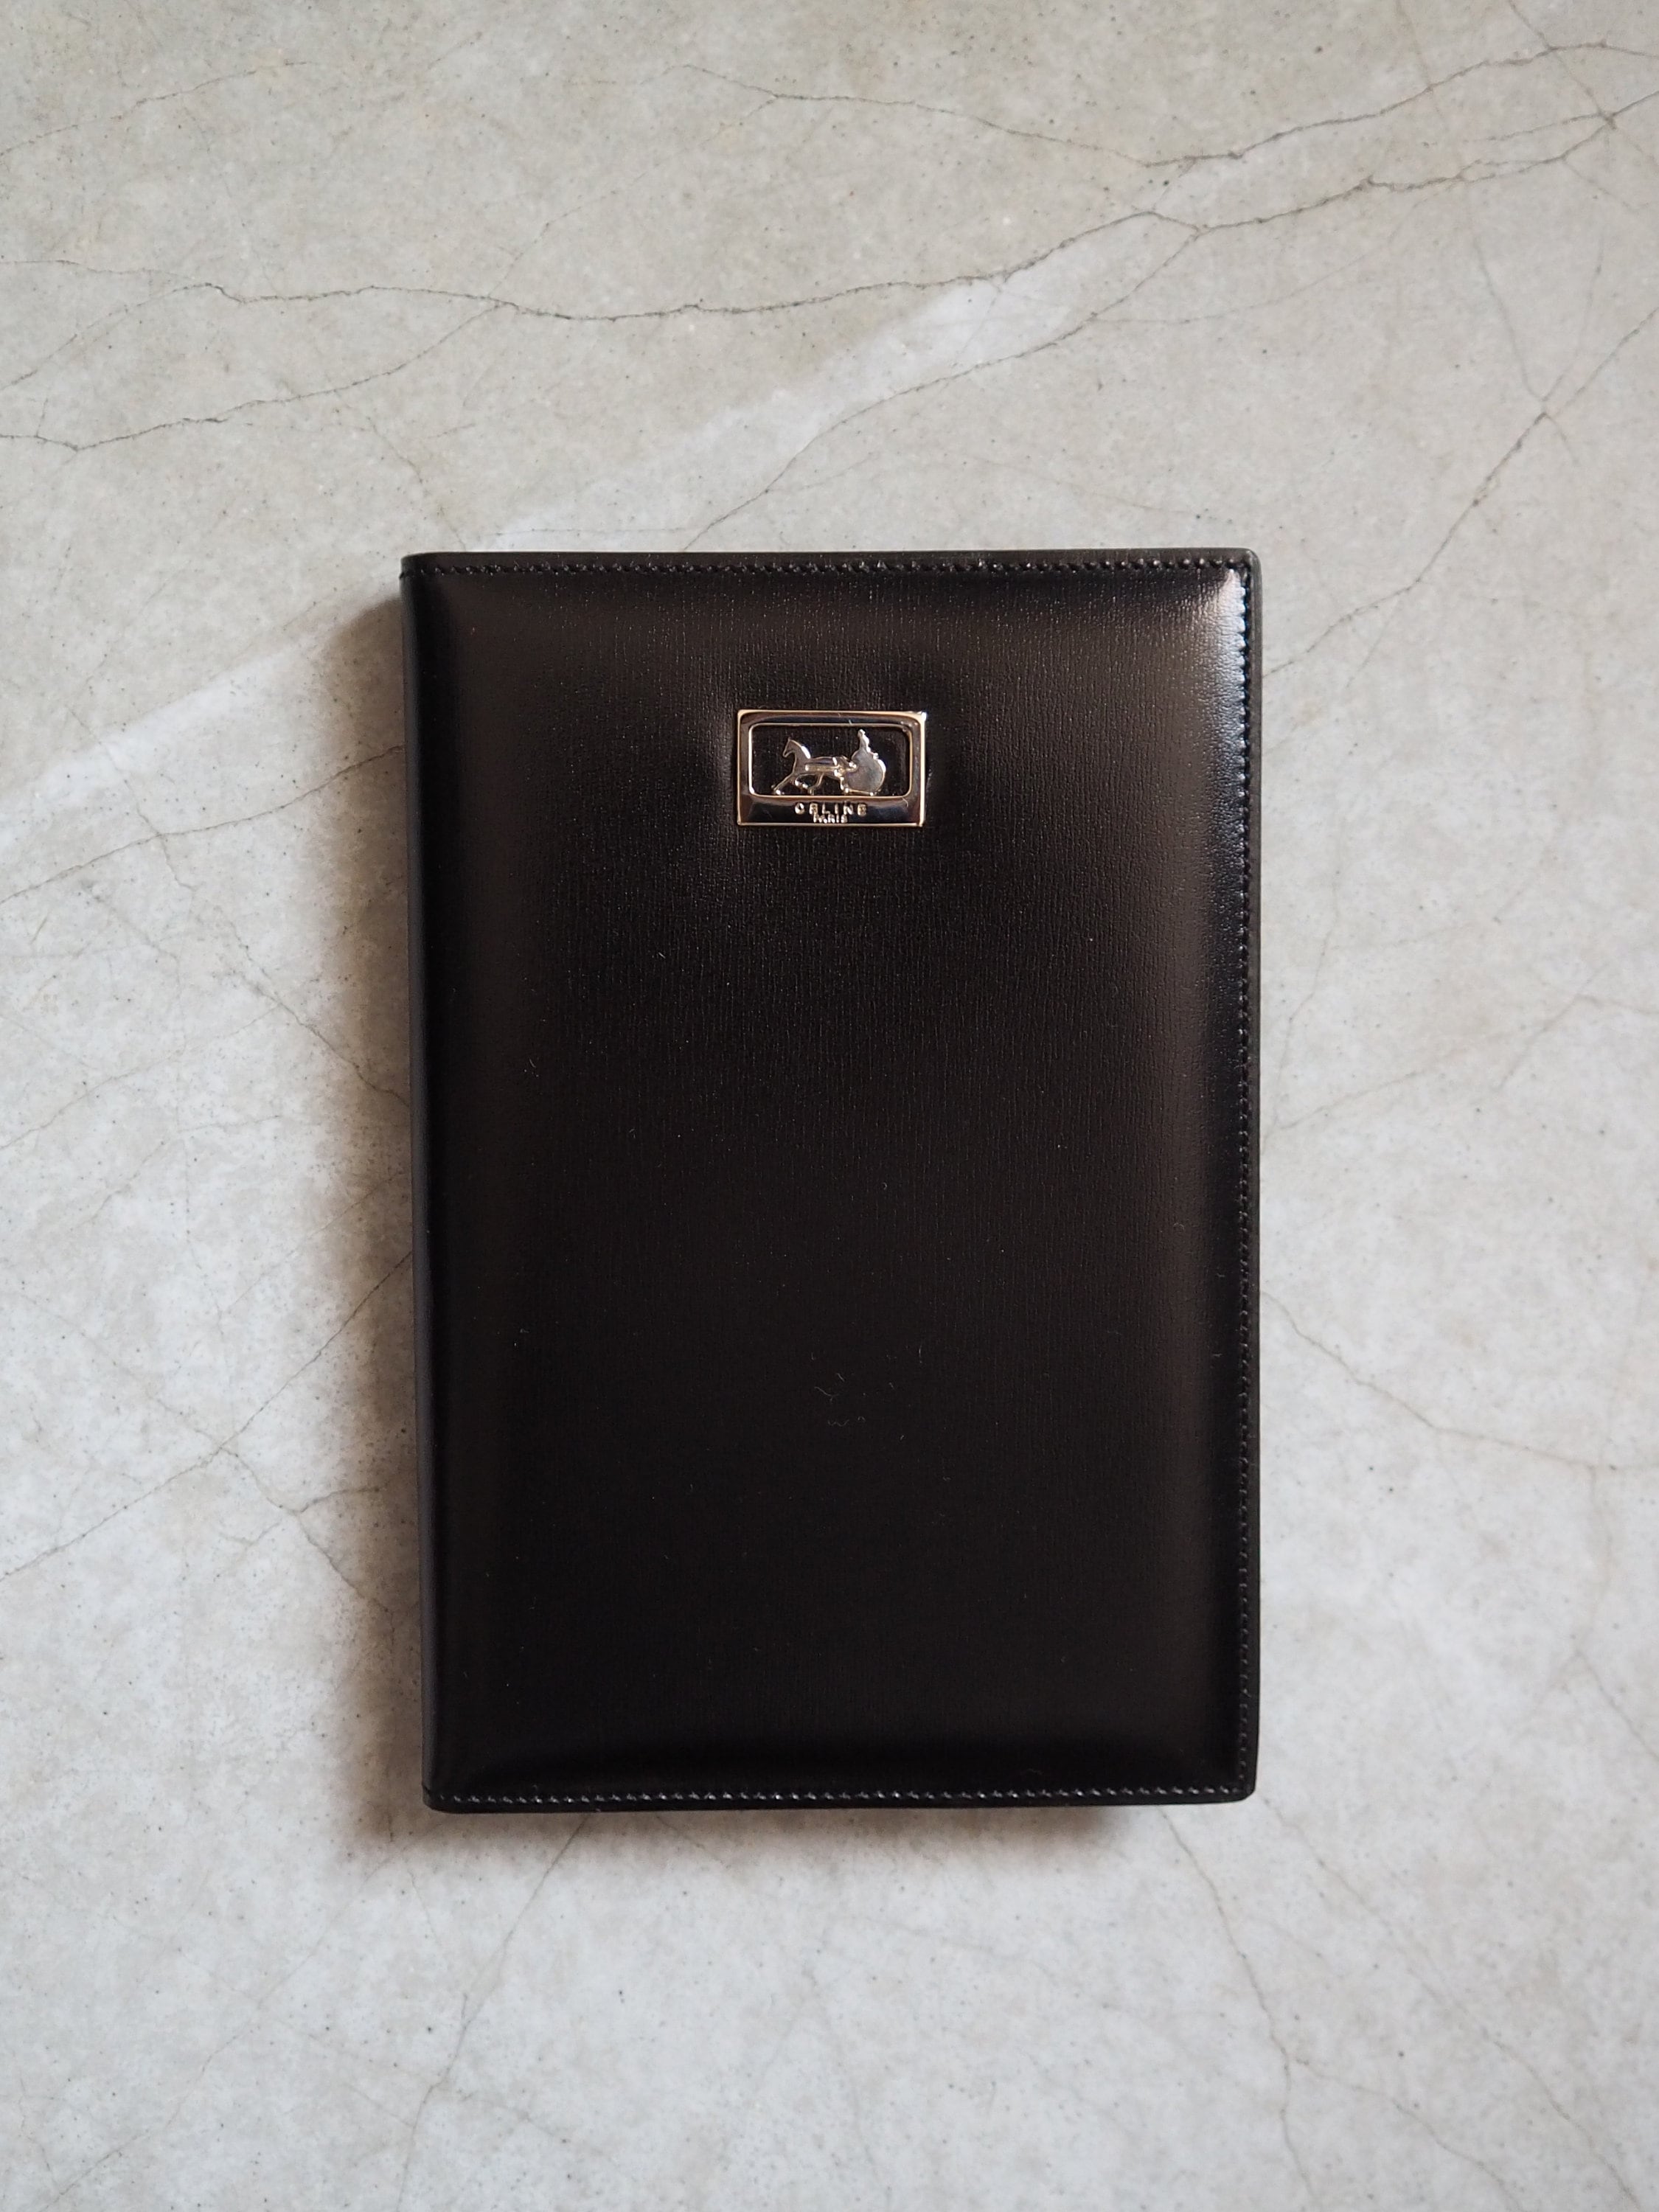 CELINE Logo Note Book Cover Leather Diary Black Vintage Authentic